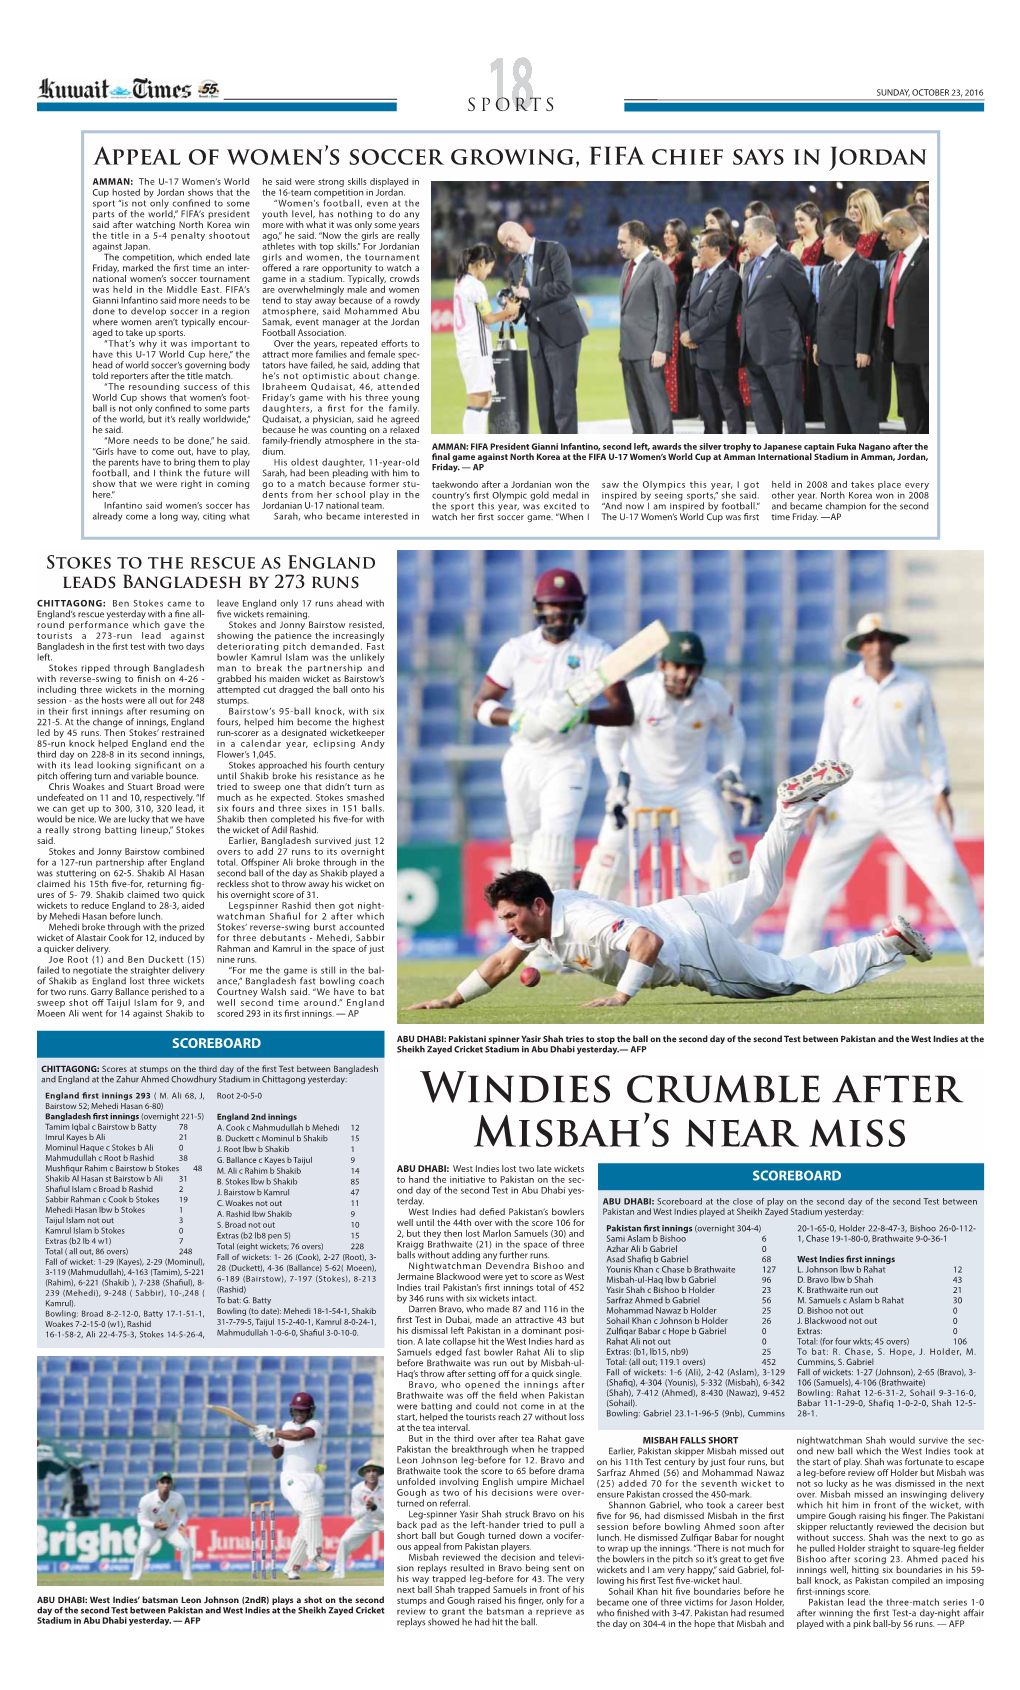 Windies Crumble After Misbah's Near Miss